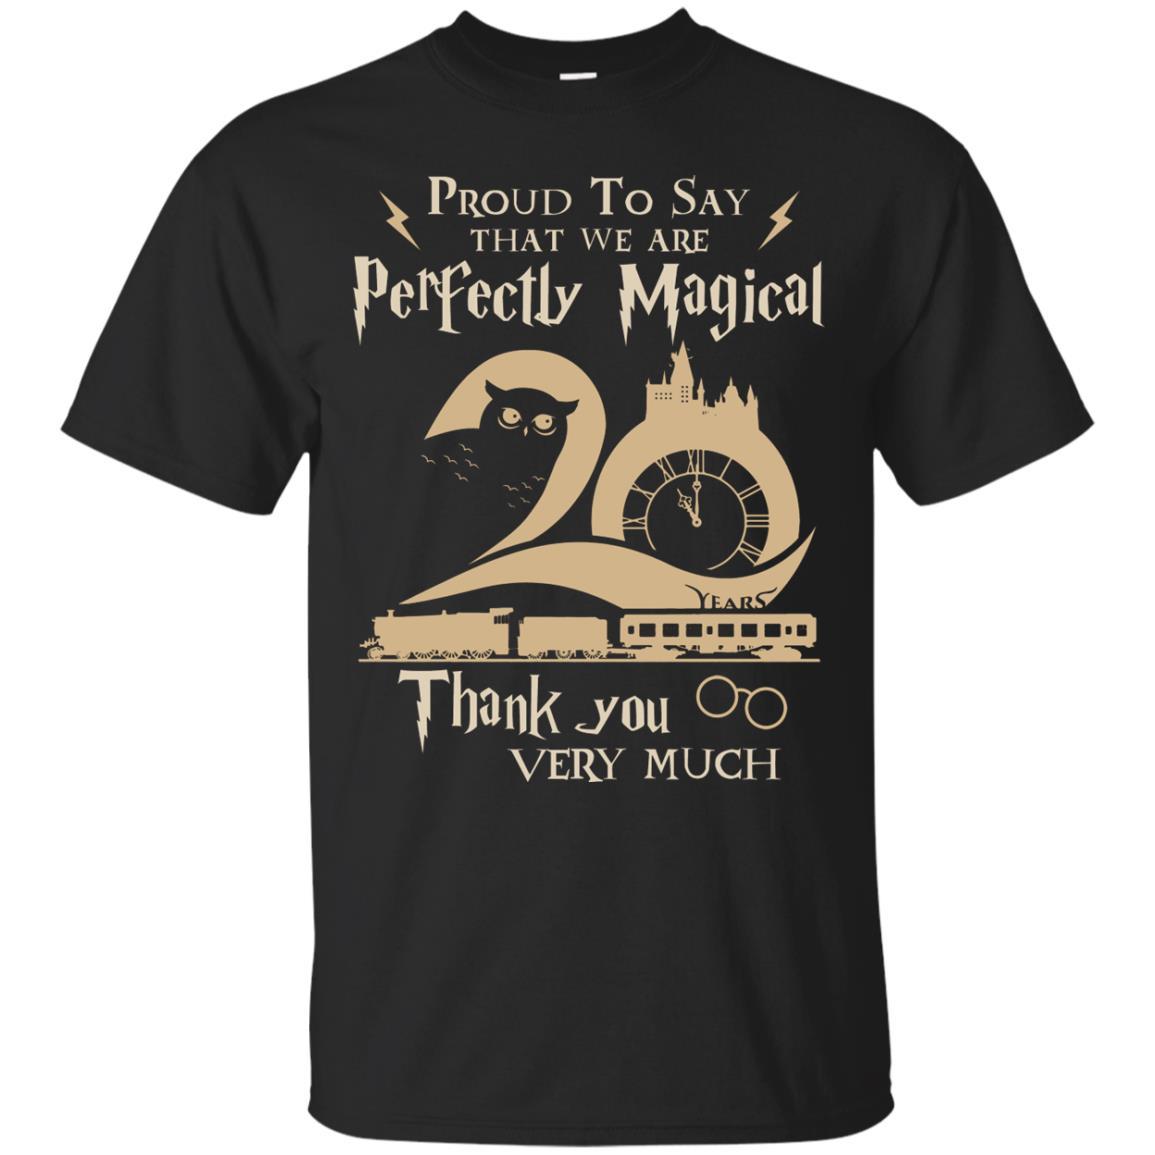 Proud To Say That We Are Perfectly Magical  Thank You Very Much Harry Potter Fan T-shirt Black S 